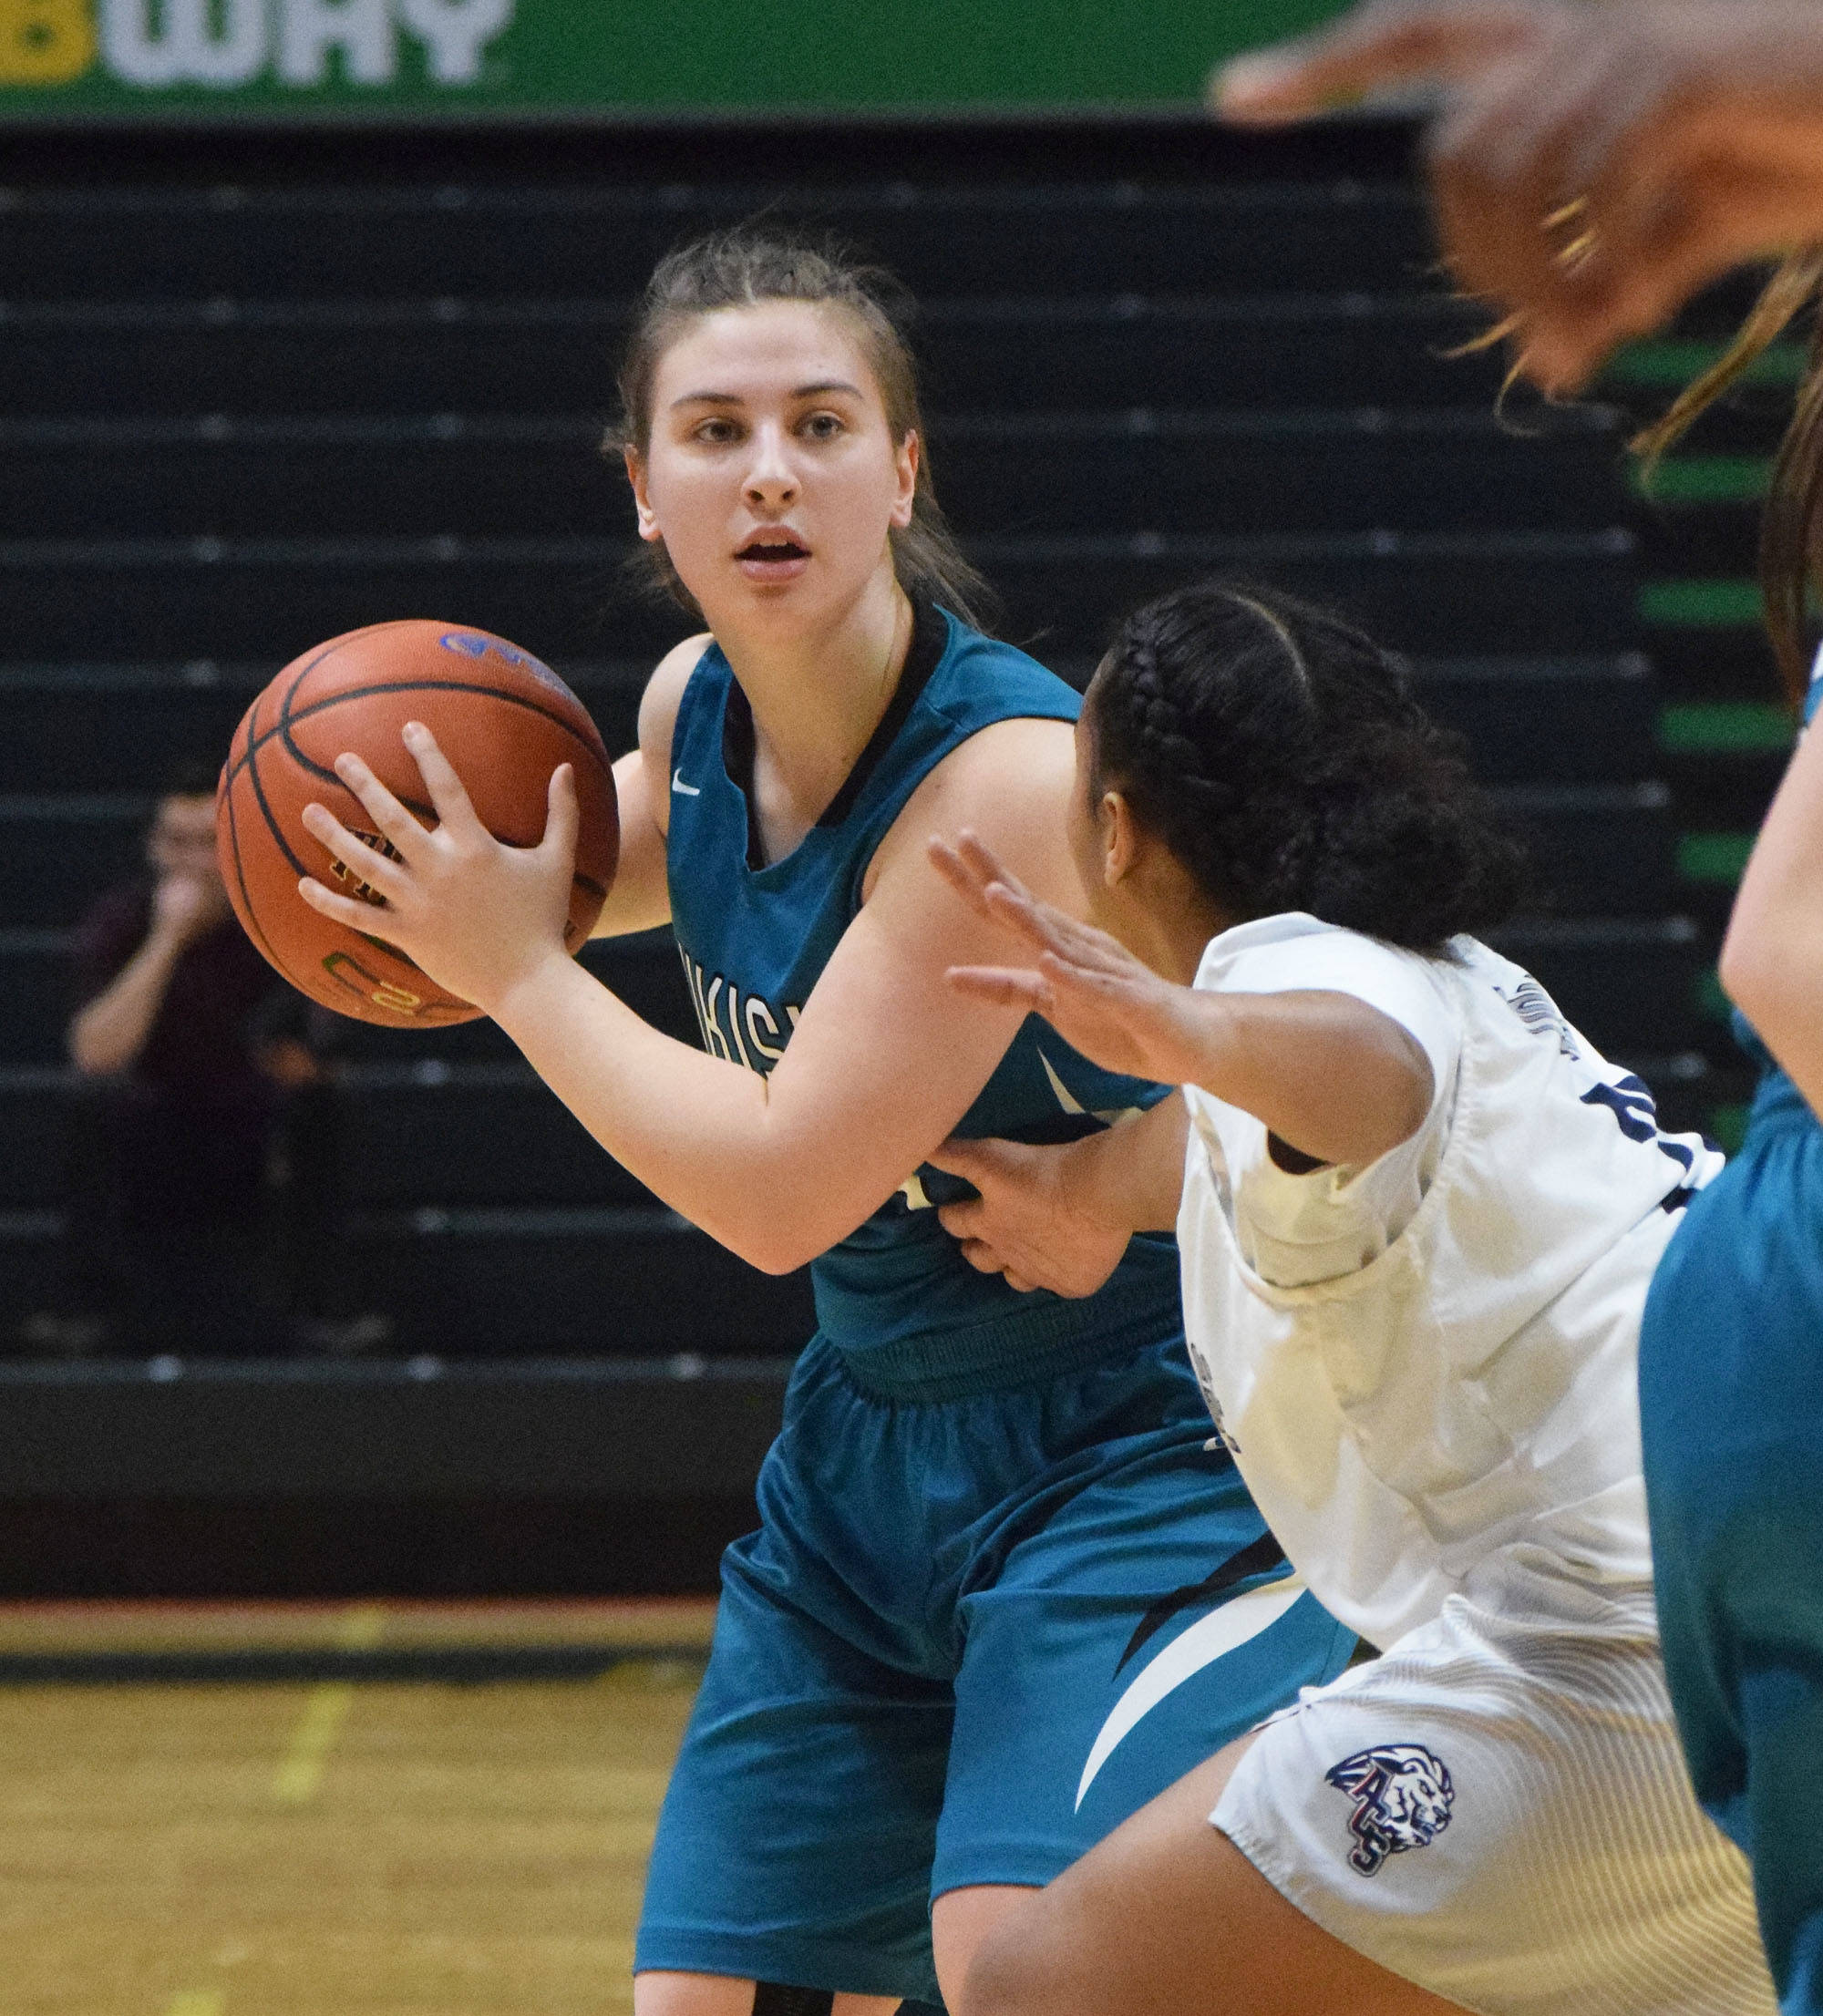 Nikiski’s Kelsey Clark looks for an open teammate in front of an ACS defender Saturday, March 23, 2019, in the Class 3A girls state basketball championship at the Alaska Airlines Center in Anchorage. (Photo by Joey Klecka/Peninsula Clarion)